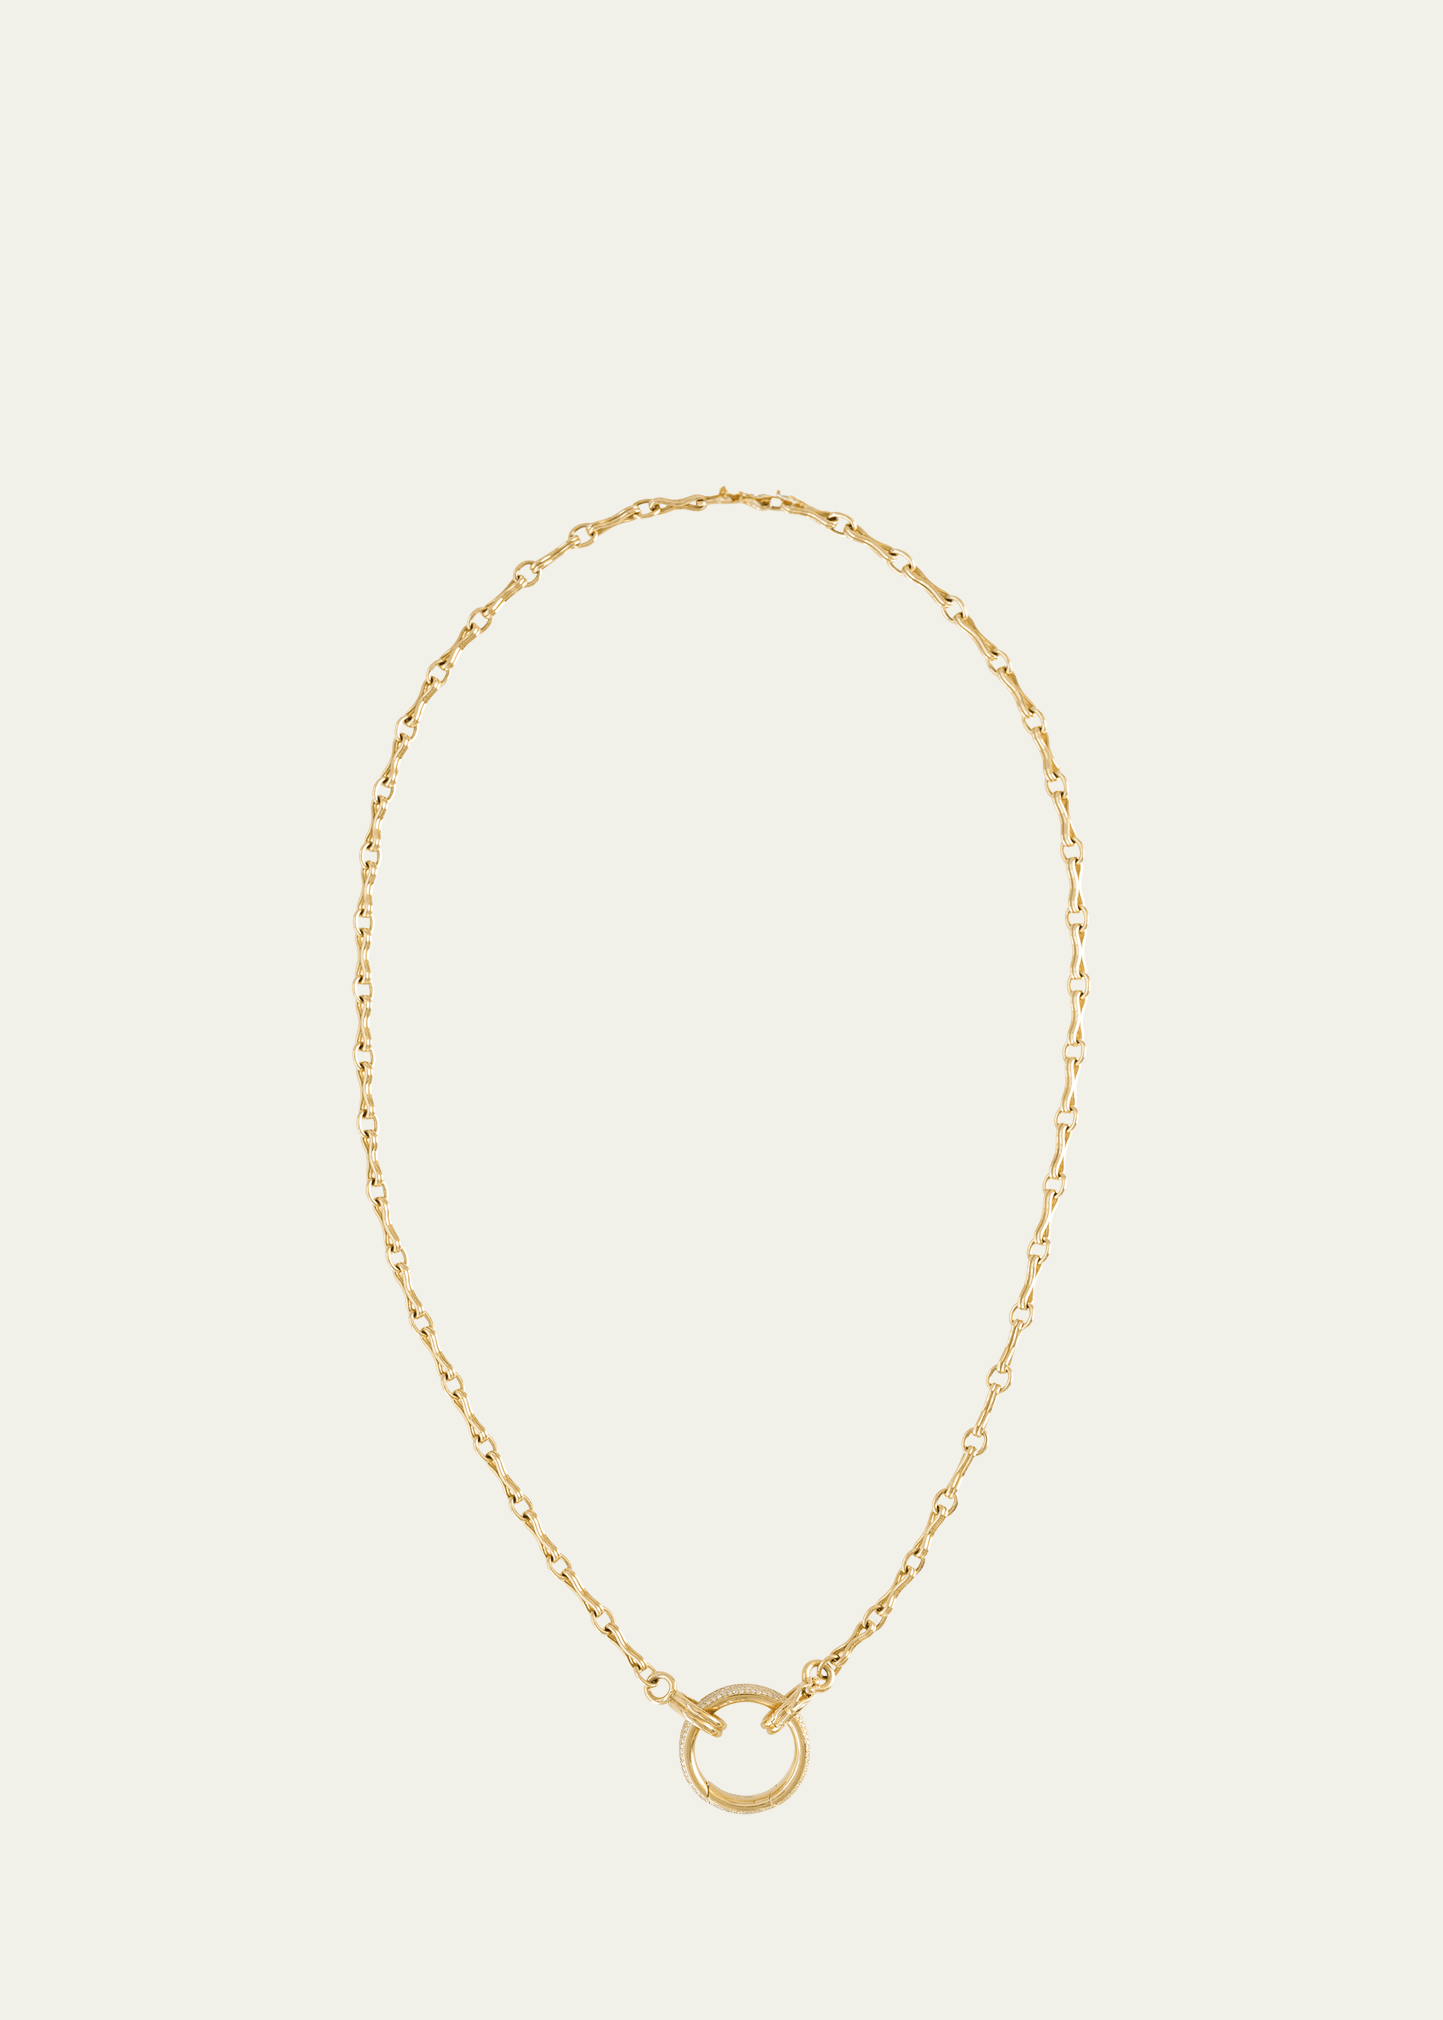 18K Yellow Gold Small Link Chain Necklace with Diamond Key Ring